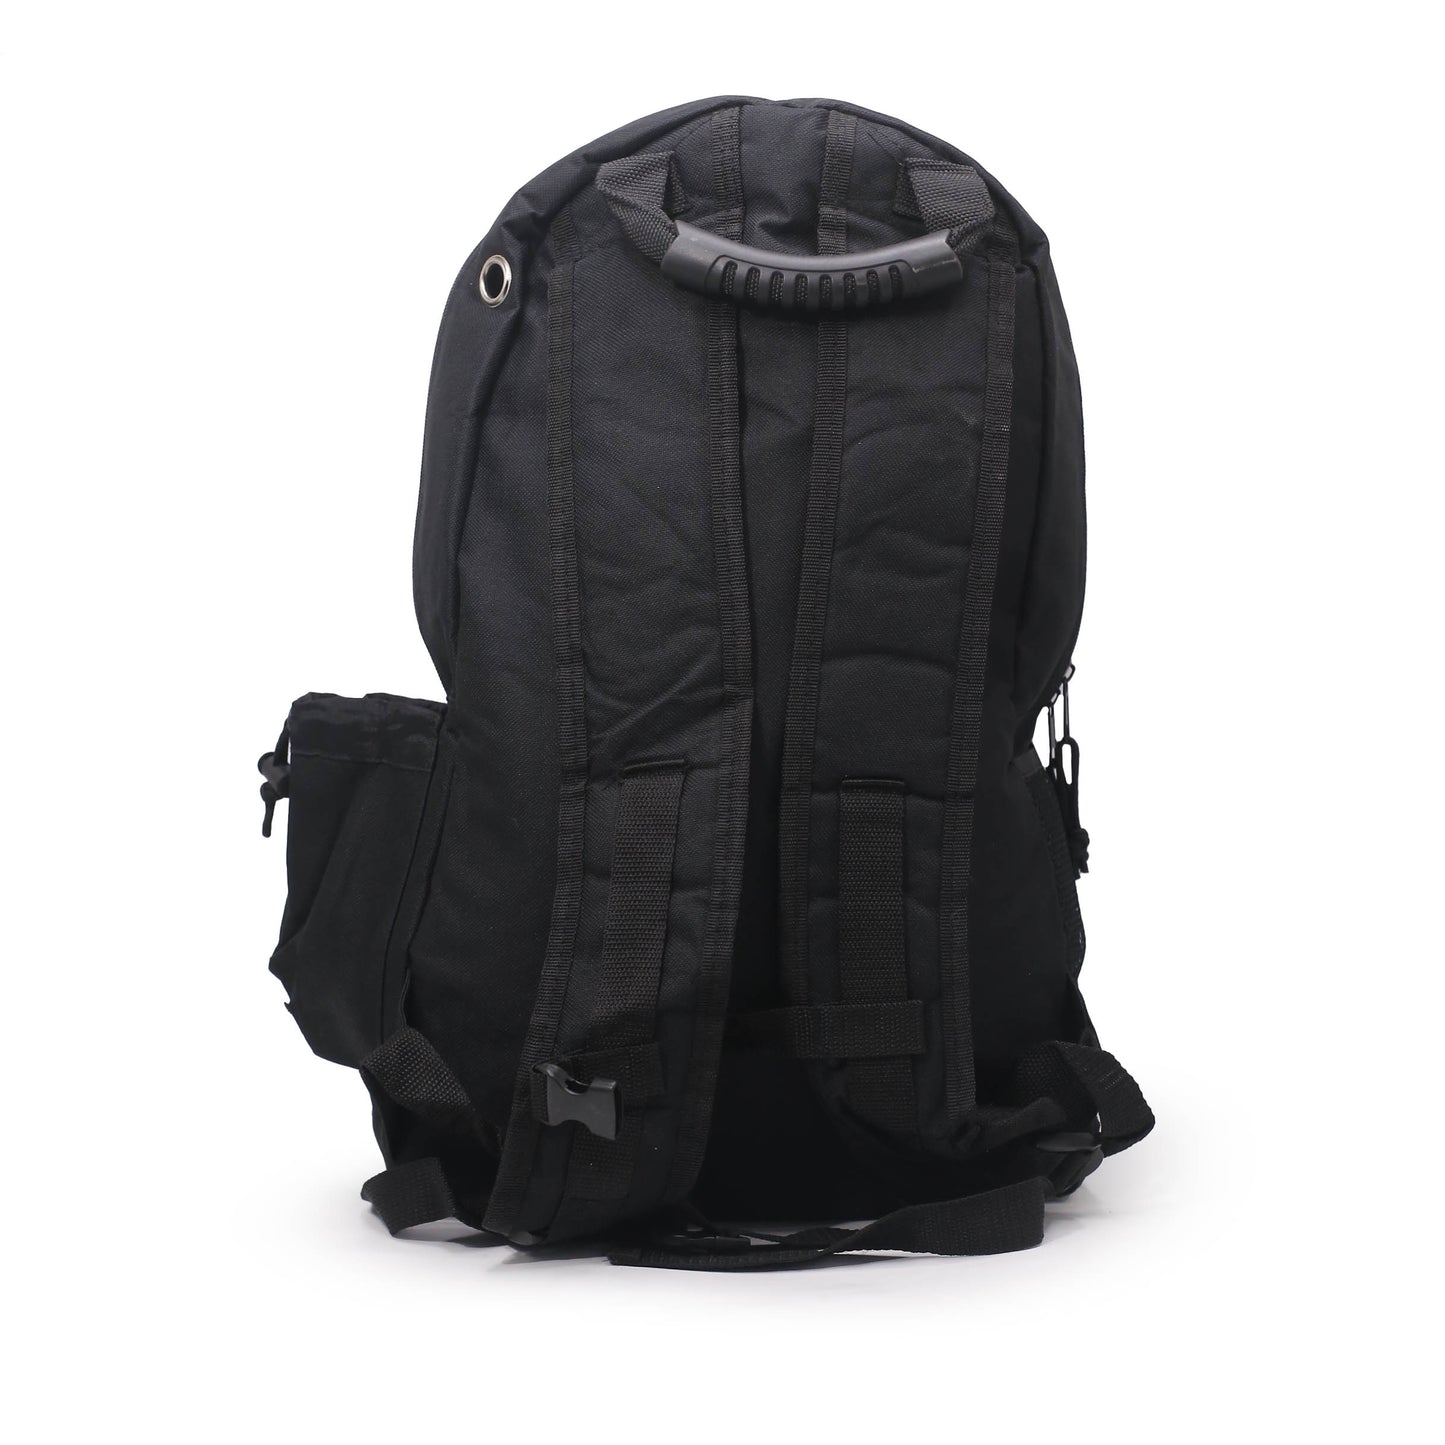 Busy Breathers Black Backpack